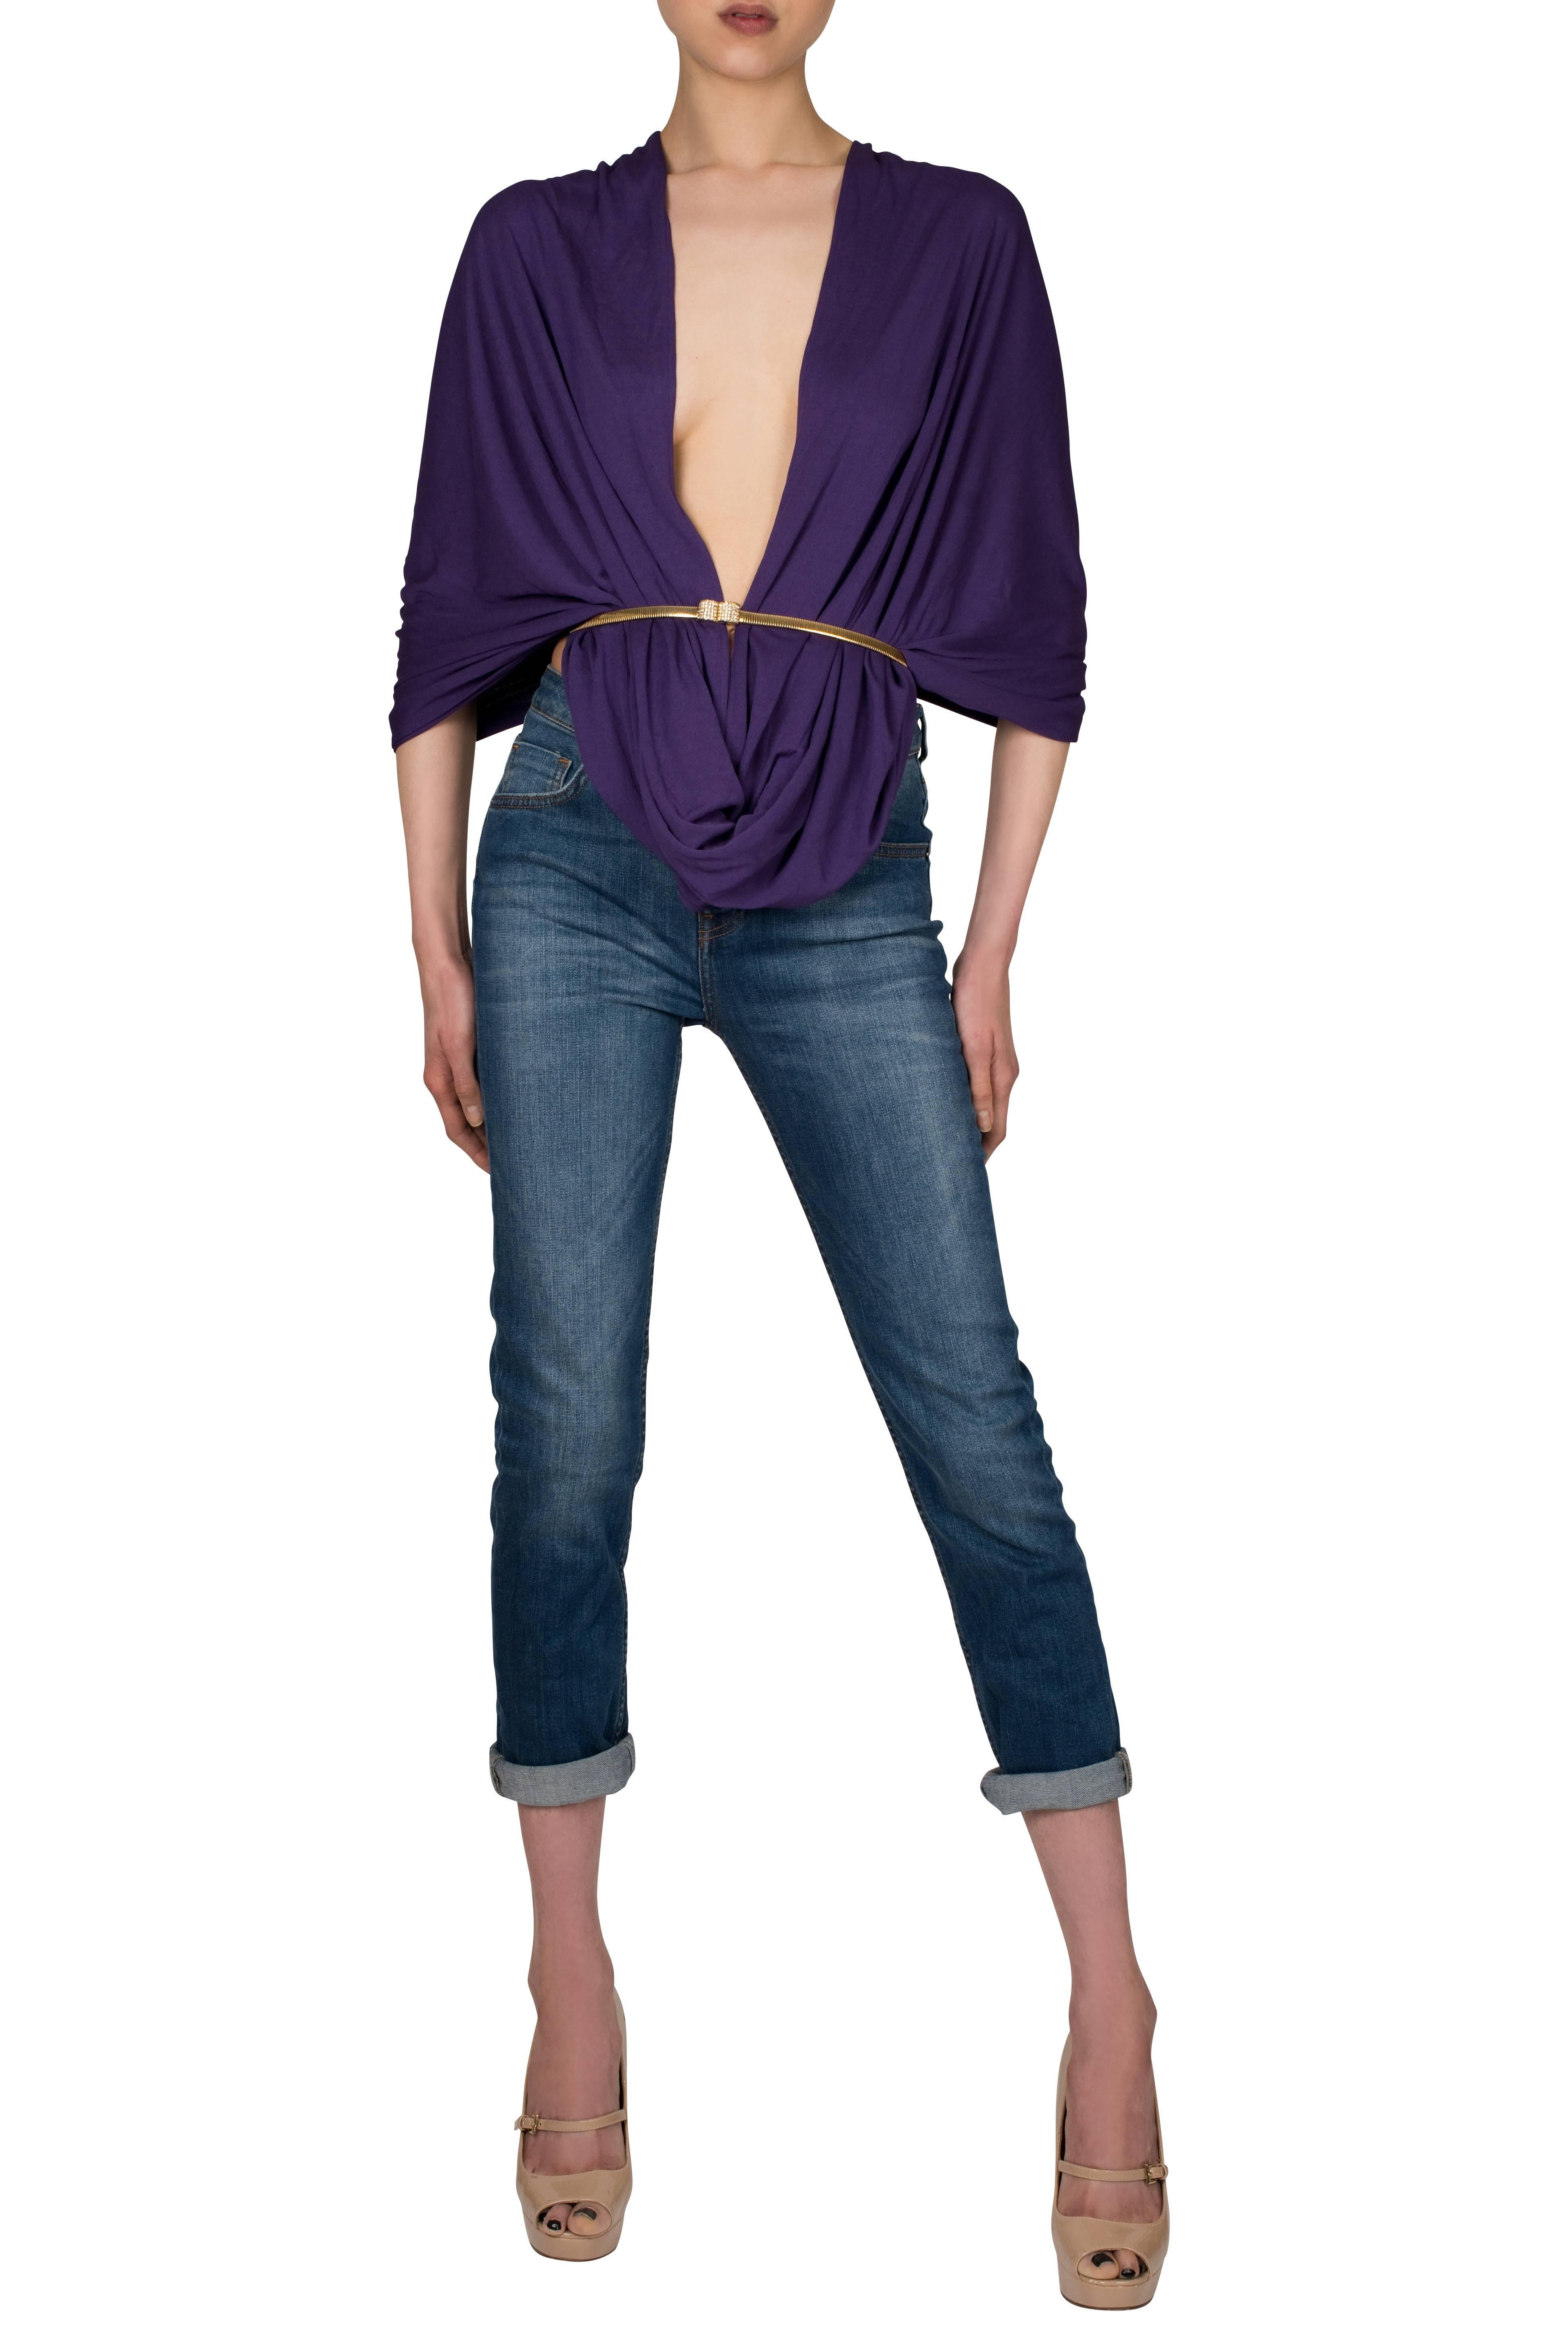 1980's OMO Norma Kamali Purple Cowl Top In Excellent Condition For Sale In London, GB